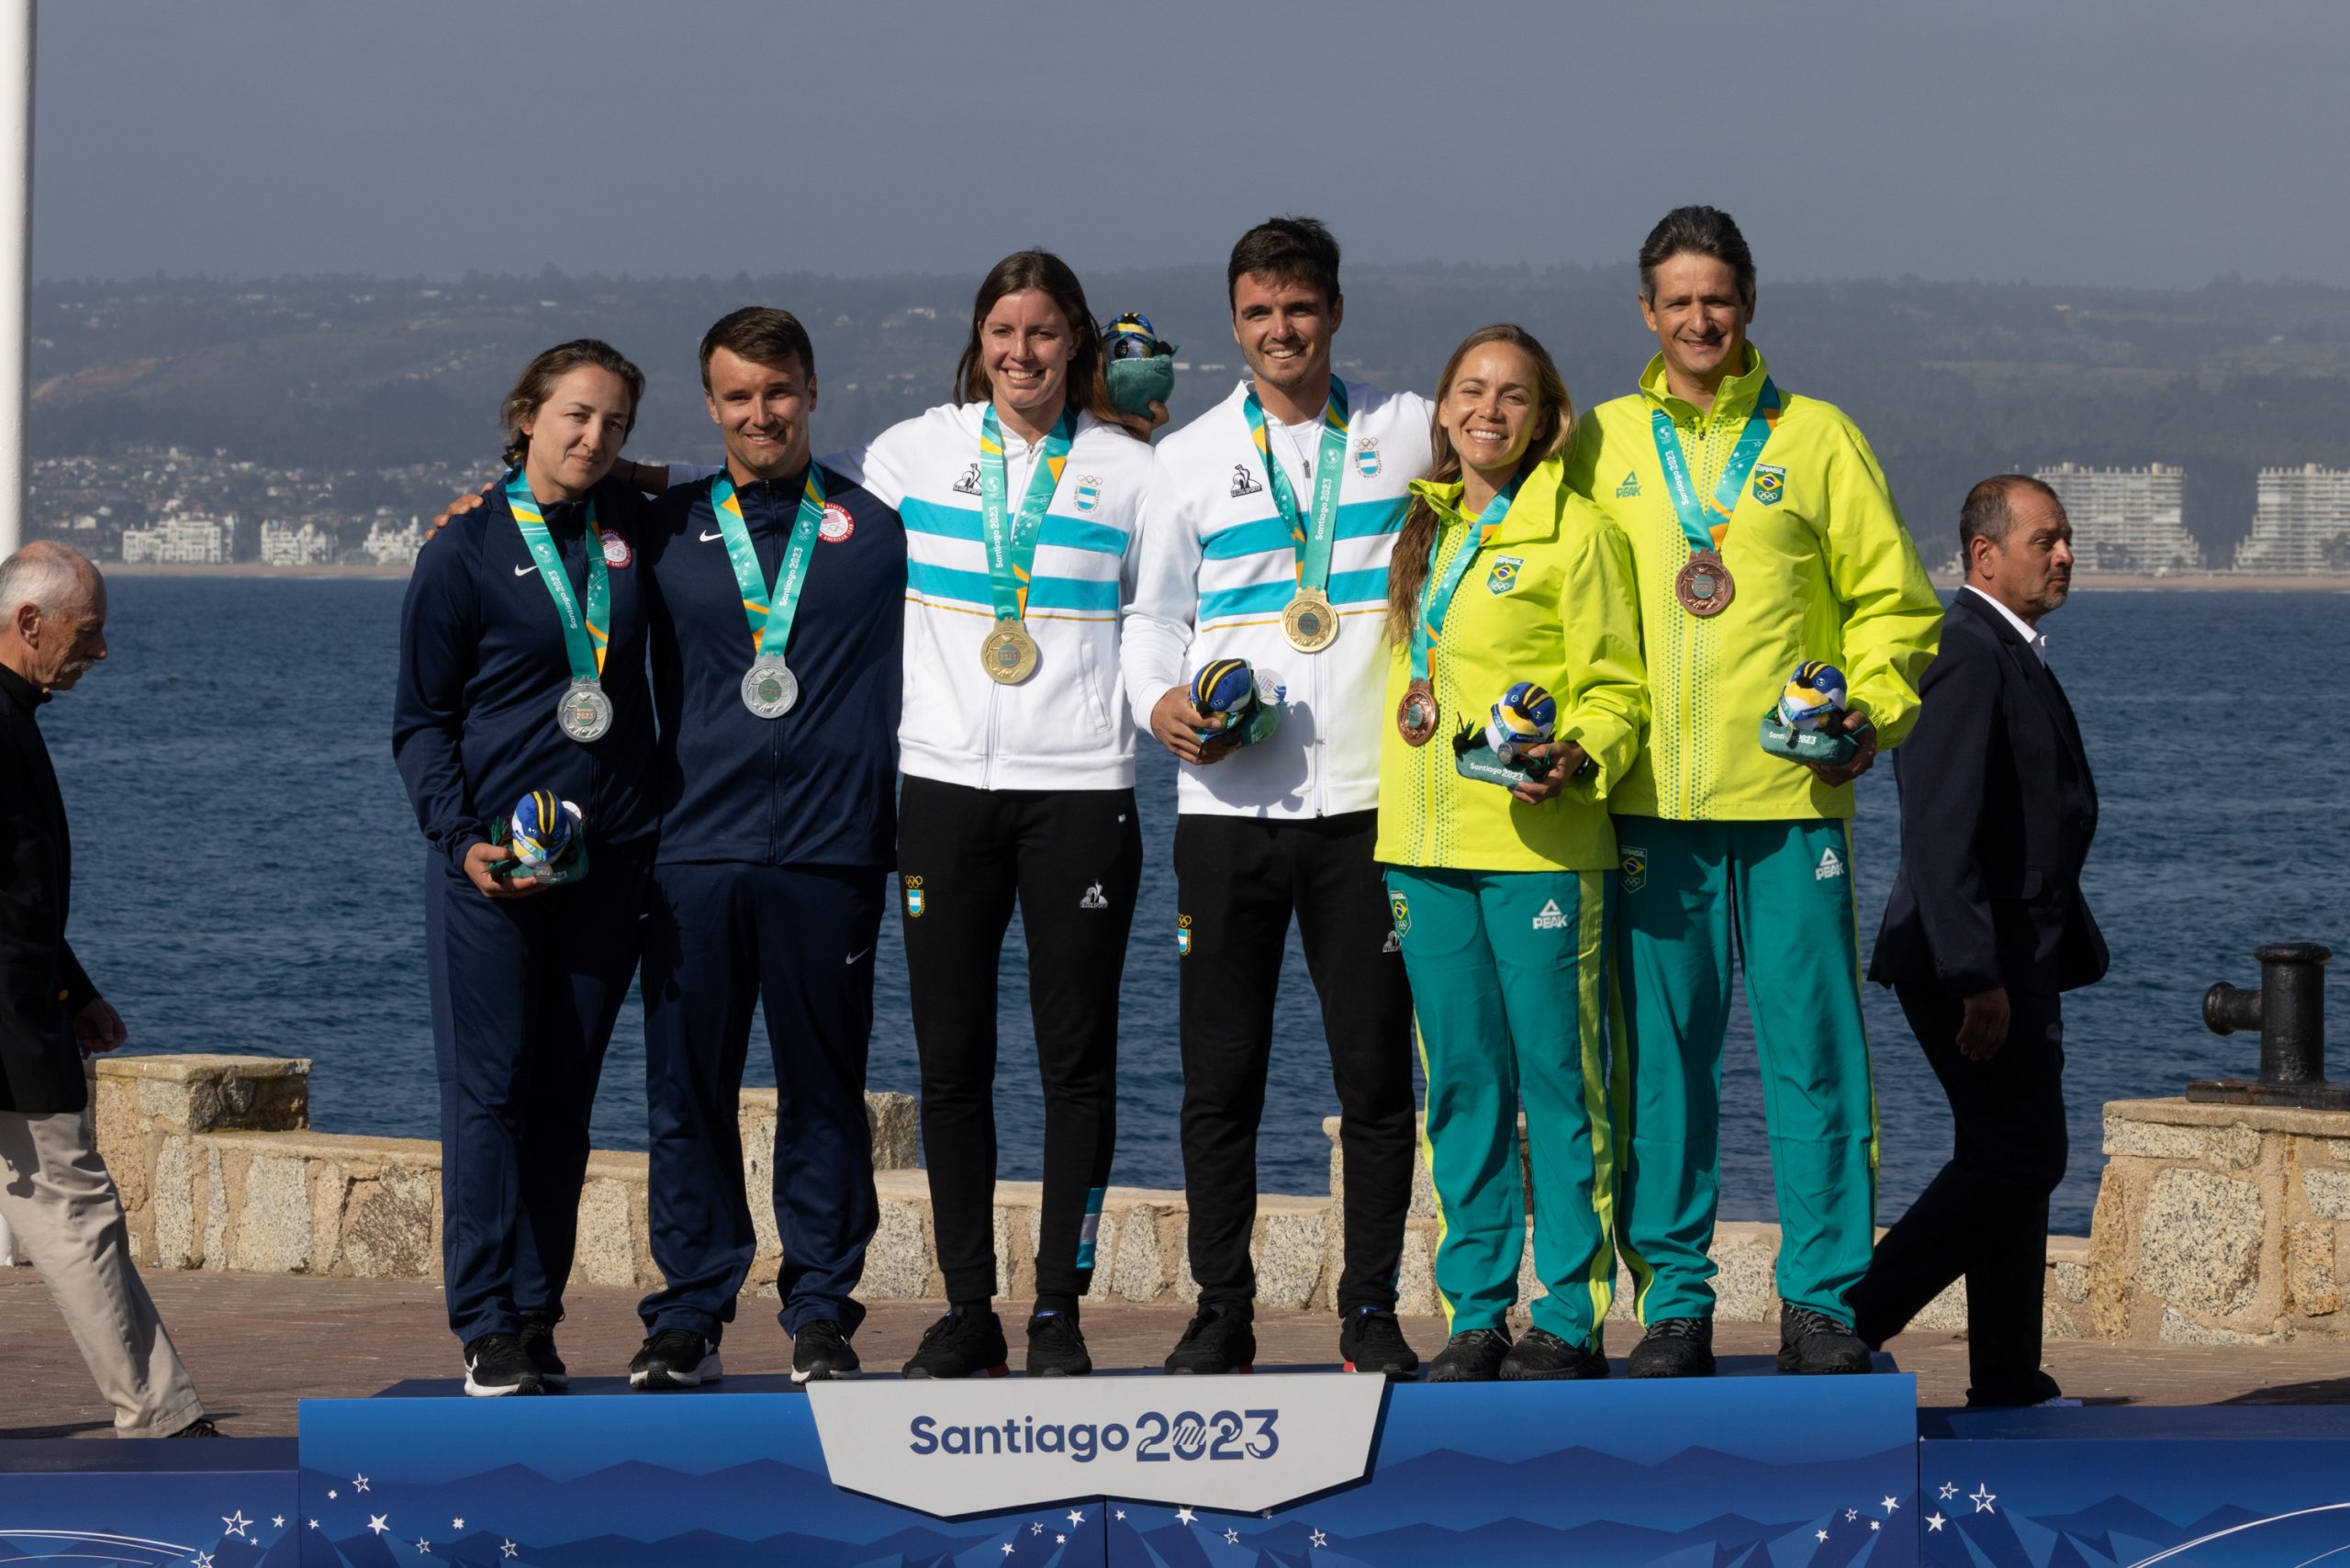 The Nacra 17 Panamerican Games Come to a Close!